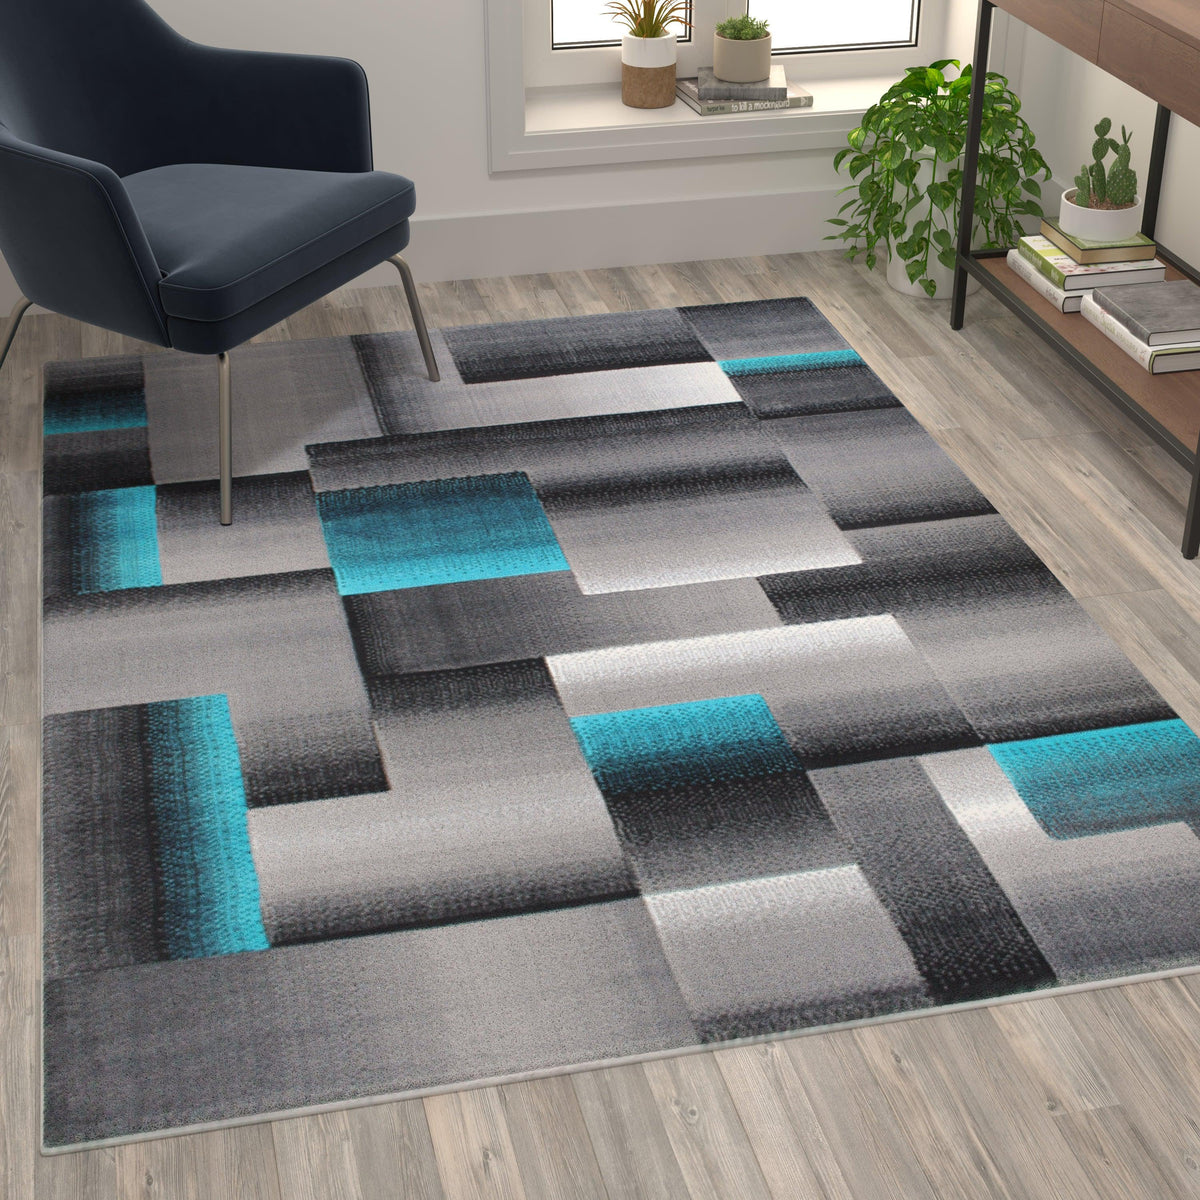 Turquoise,5' x 7' |#| Modern Geometric Style Color Blocked Indoor Area Rug - Turquoise - 5' x 7'